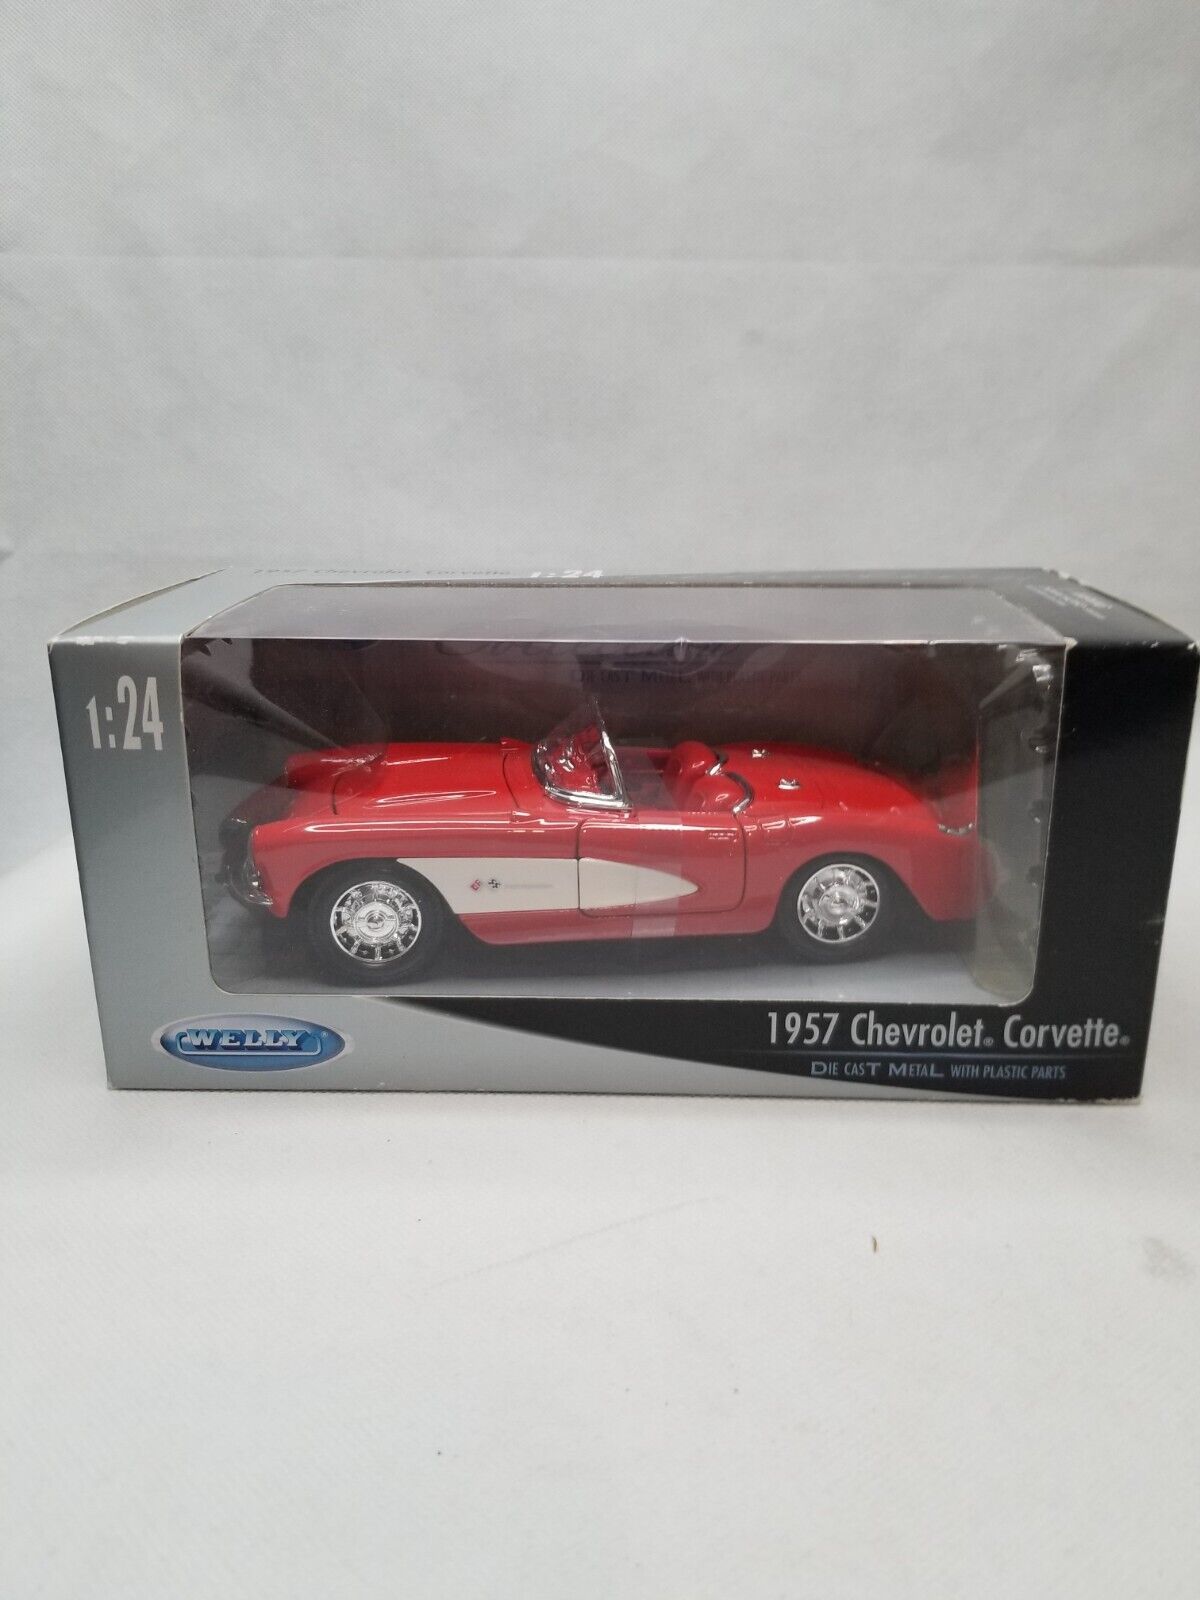 1957 Chevrolet Corvette Convertible Die Cast Car- 1:24 scale by Welly NIB 29393W - $15.83